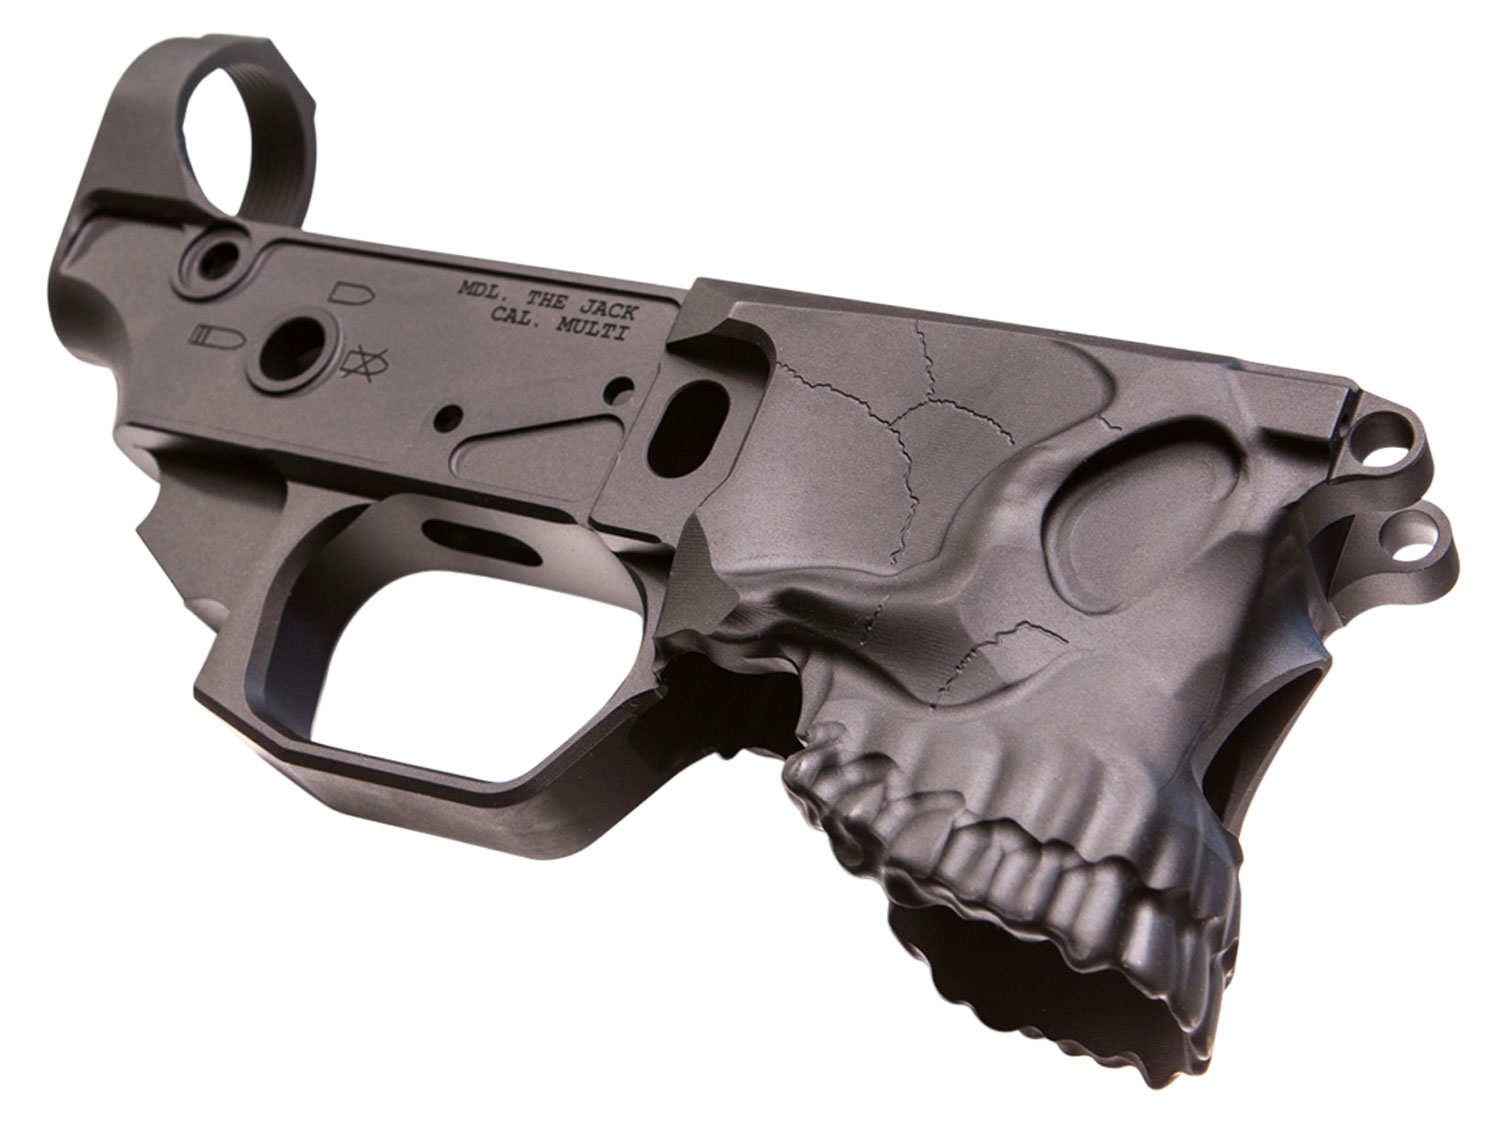 Sharps Bros SBLR03 The Jack Stripped Lower Multi-Caliber Black Anodized Finish 7075-T6 Aluminum Material Compatible with Mil-Spec Parts for AR-15